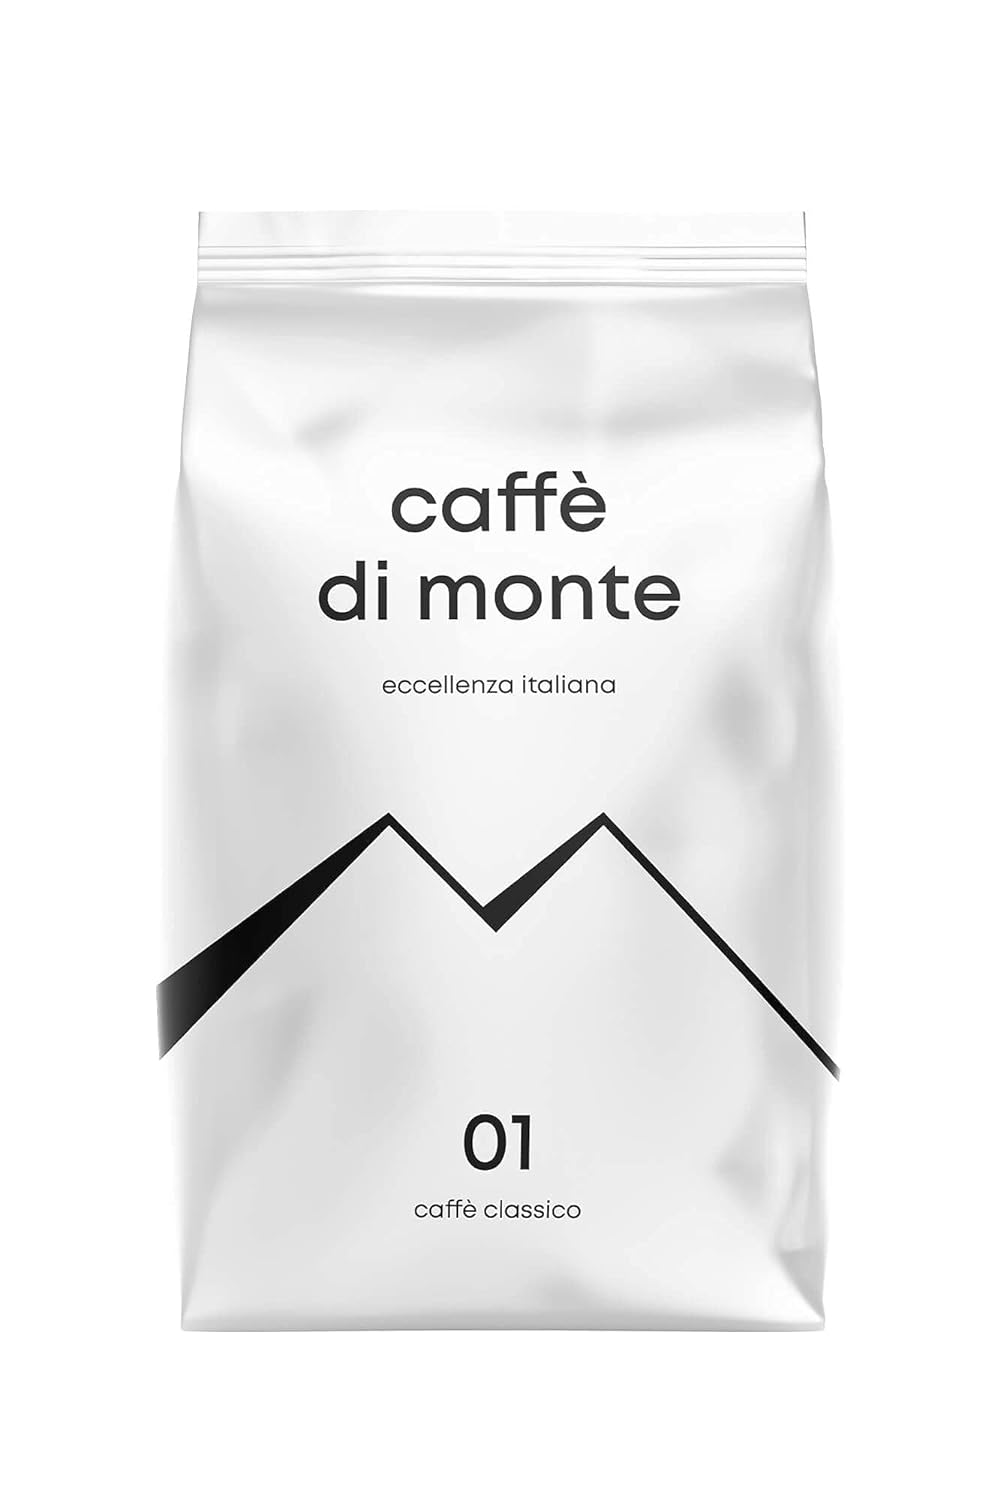 CAFFÈ DI MONTE® Classico Whole Coffee Beans (1 kg) - Ideal for Coffee from Portafilter & Fully Automatic Machines or as Filter Coffee - Medium Roast Italian Style - Chocolate, Nutty - Low Acid